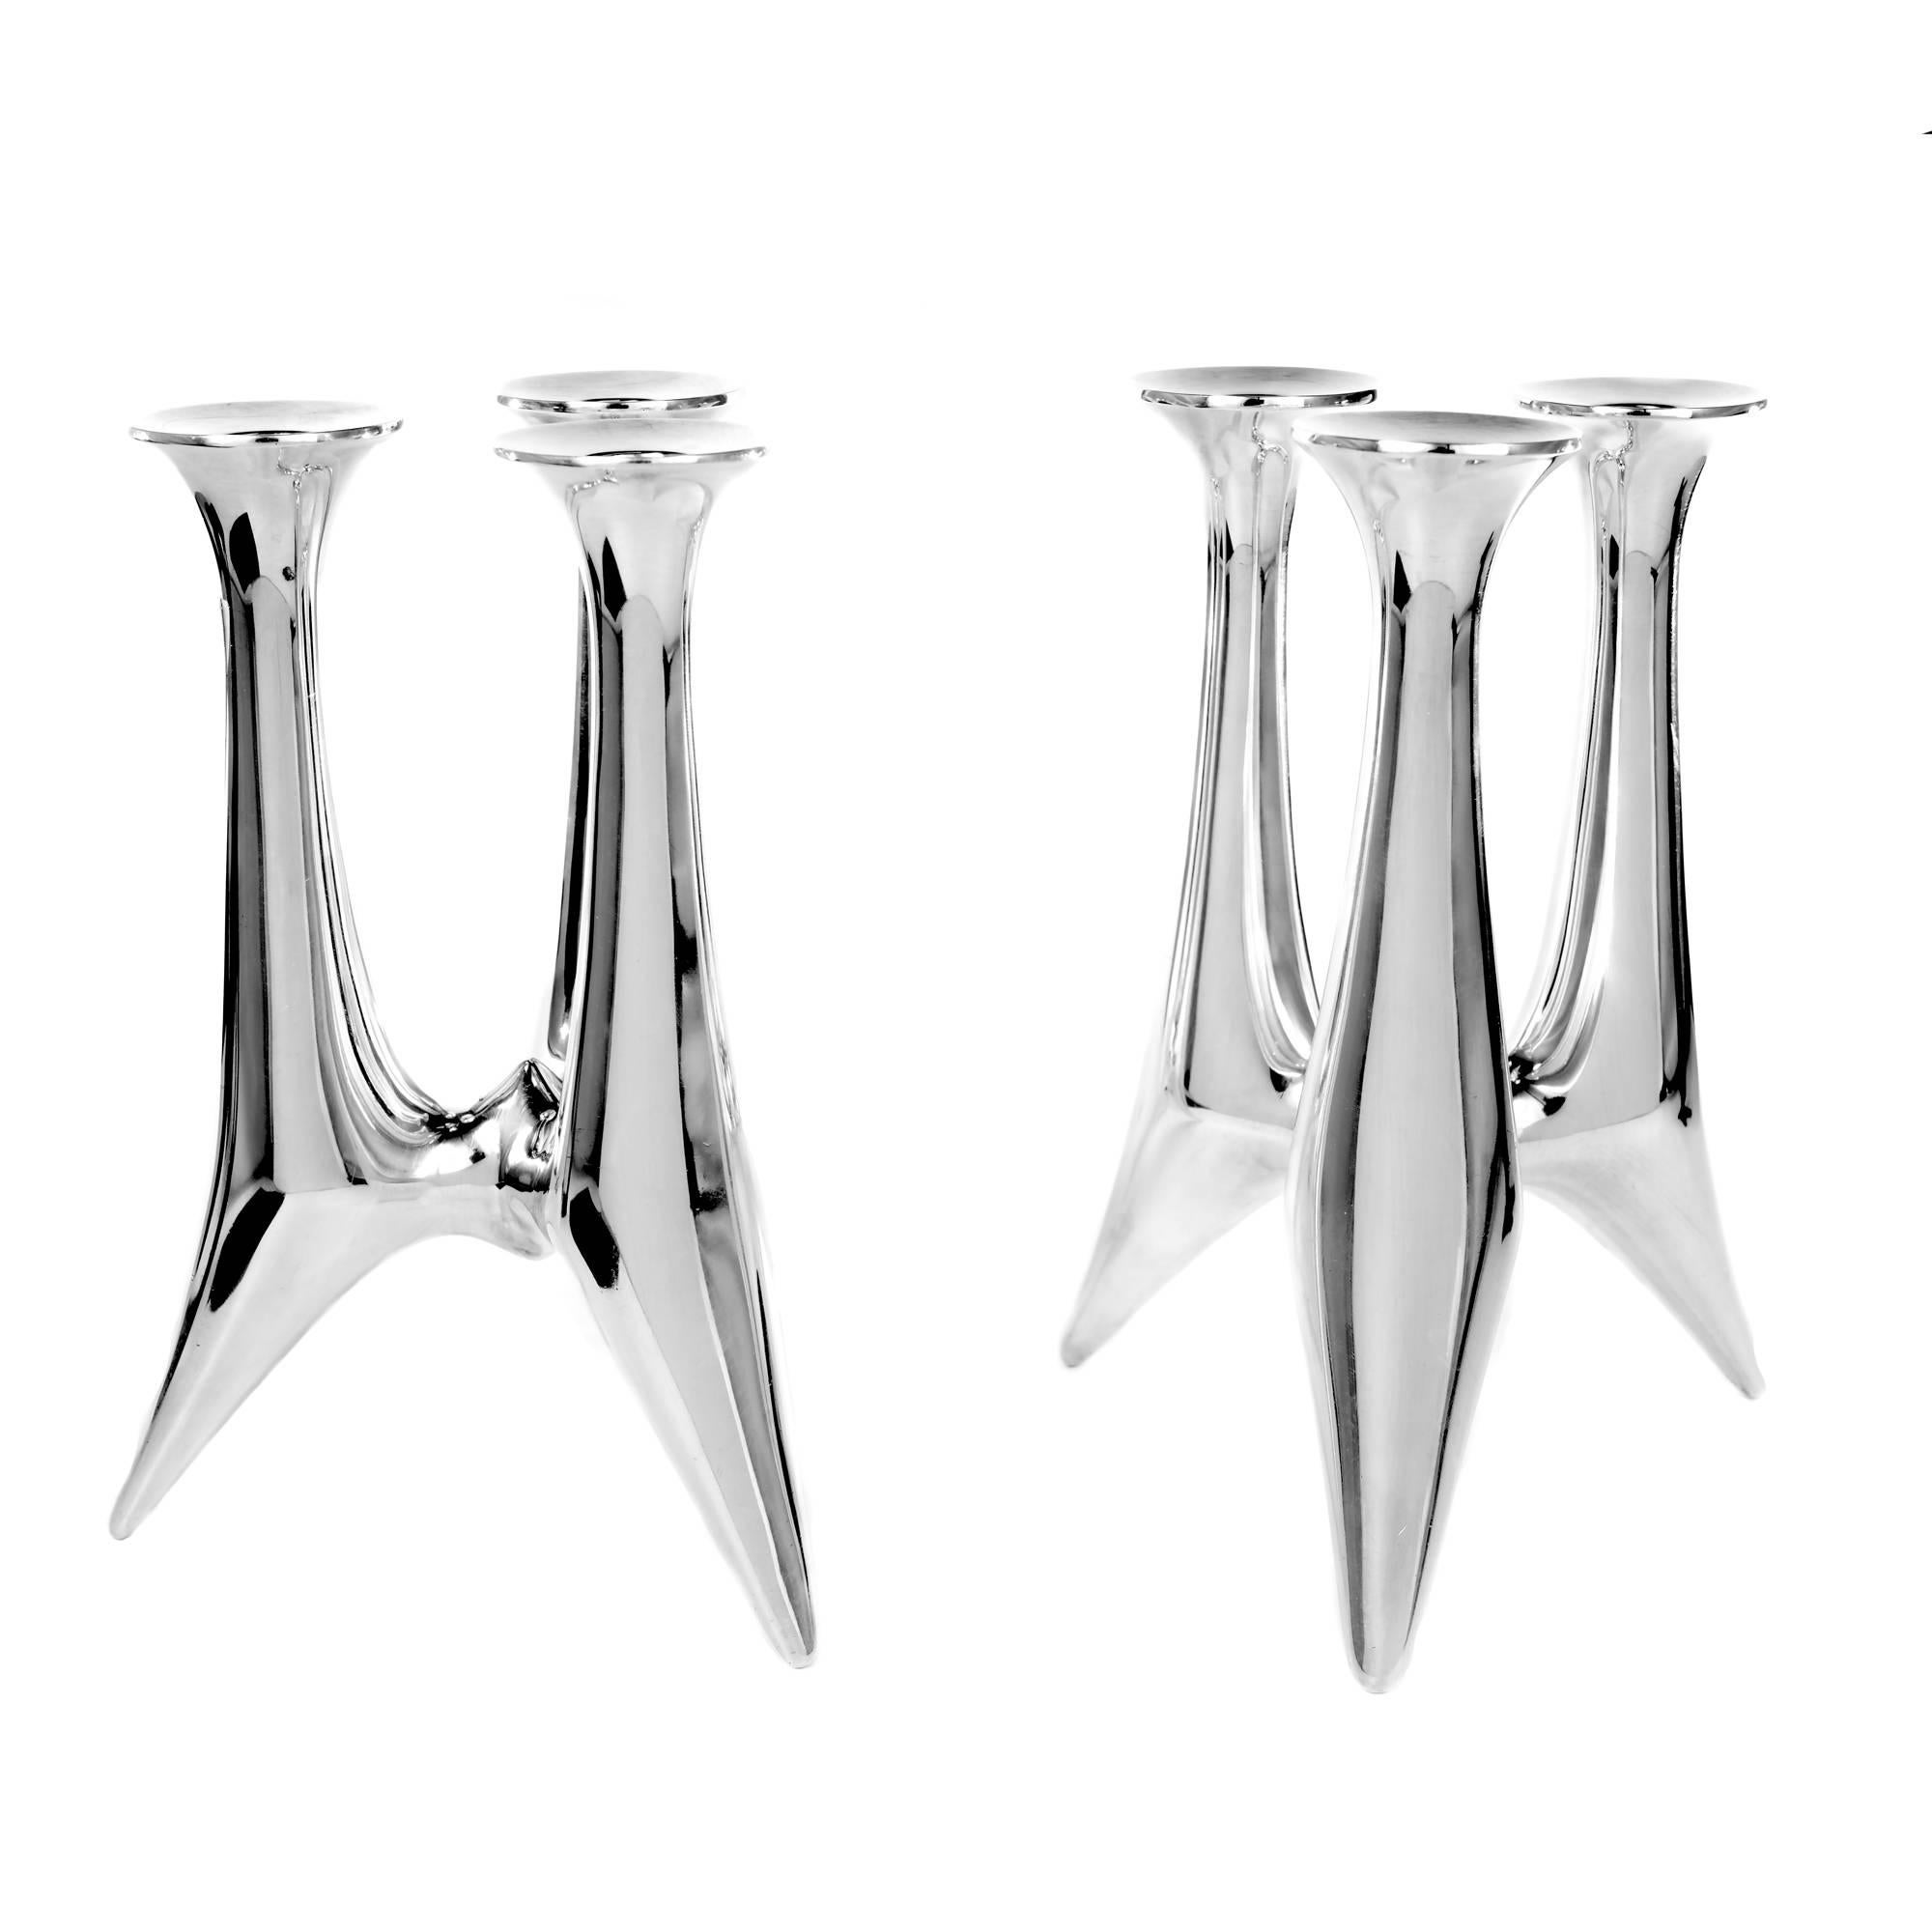 Designed by Bent Gabrielsen for Hans Hansen, Sterling Silver Candleholders. 

925 silver
Top to bottom: 7.25 inches
Width: 4.33 inches
30 ounces
Stamped: Sterling
Tested: 925 silver
Hallmark: Hans Hansen Denmark 494